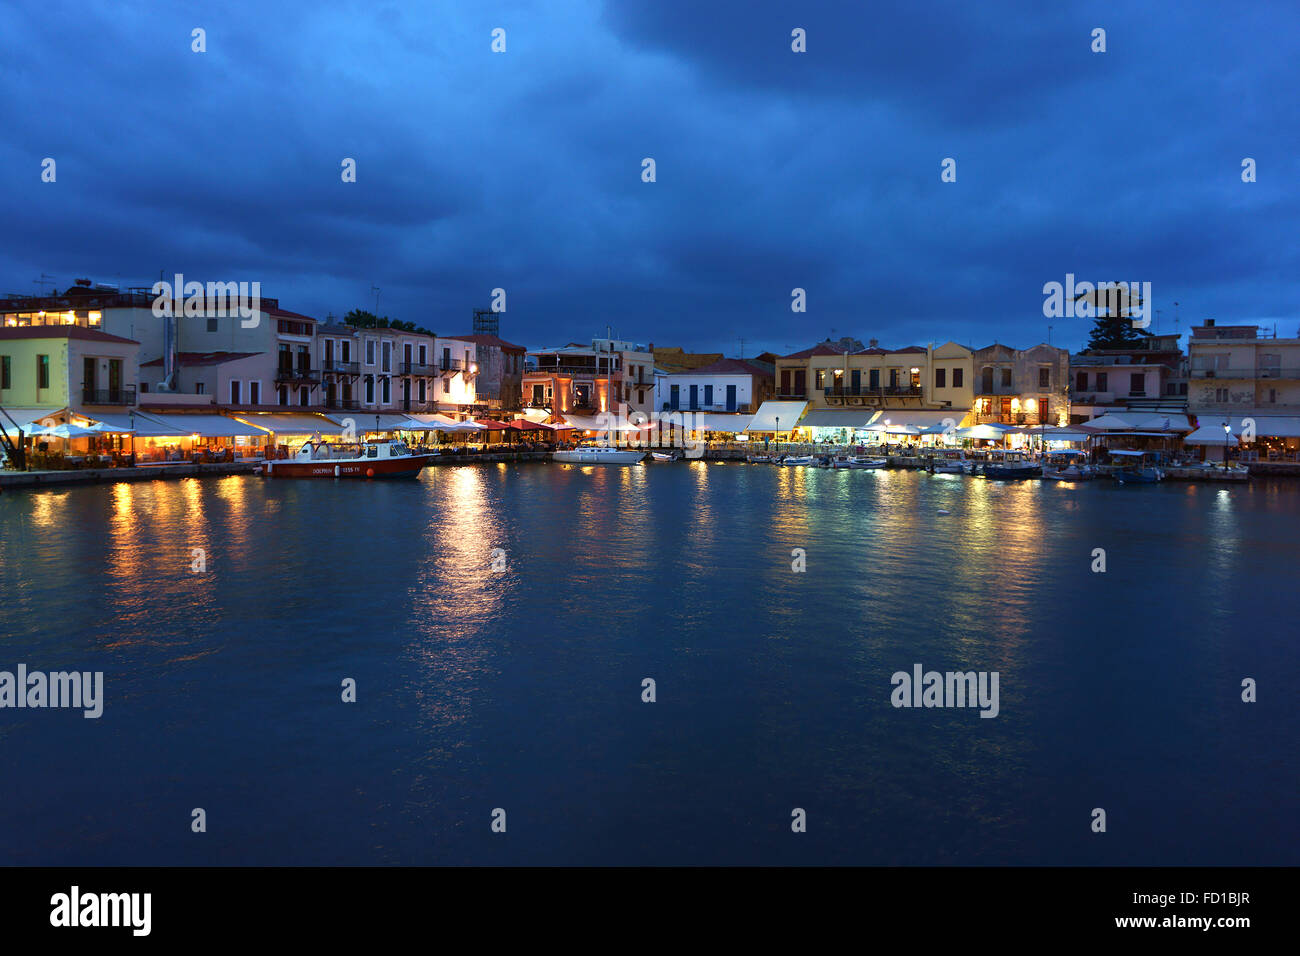 Harbor and old town Rethimno with restaurants at dusk, island Crete ...